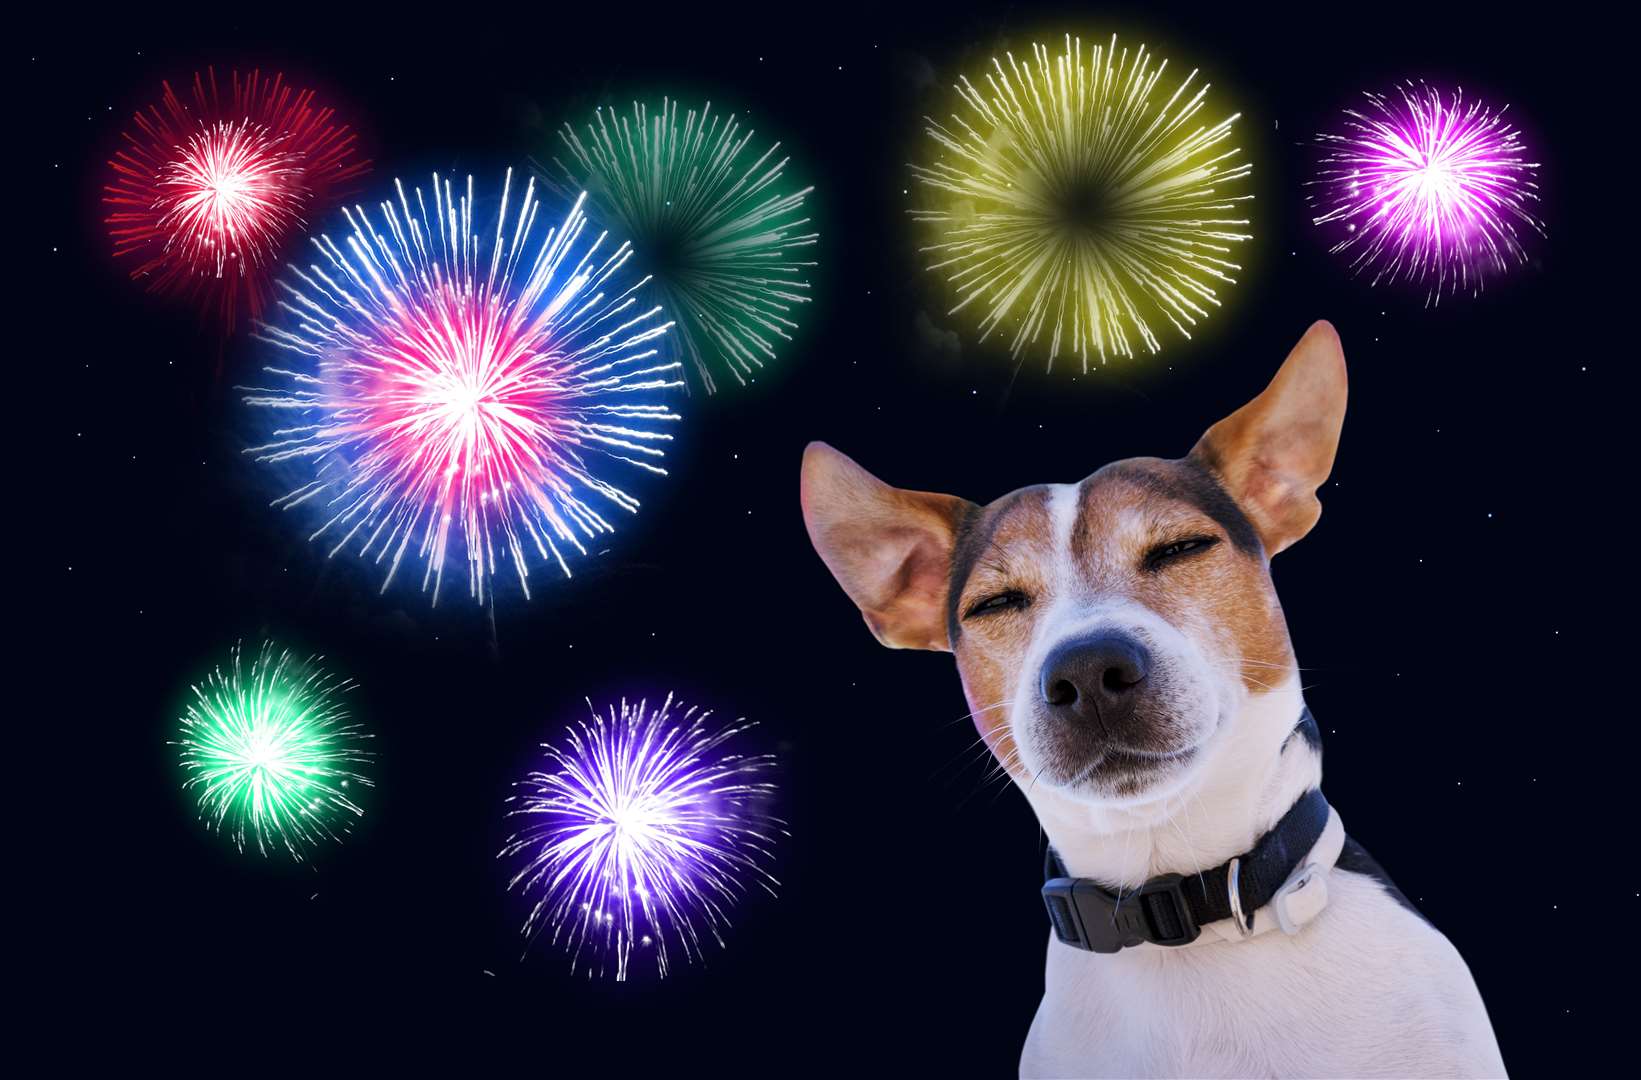 Some early preparation can make the fireworks season a less stressful experience for your pet.